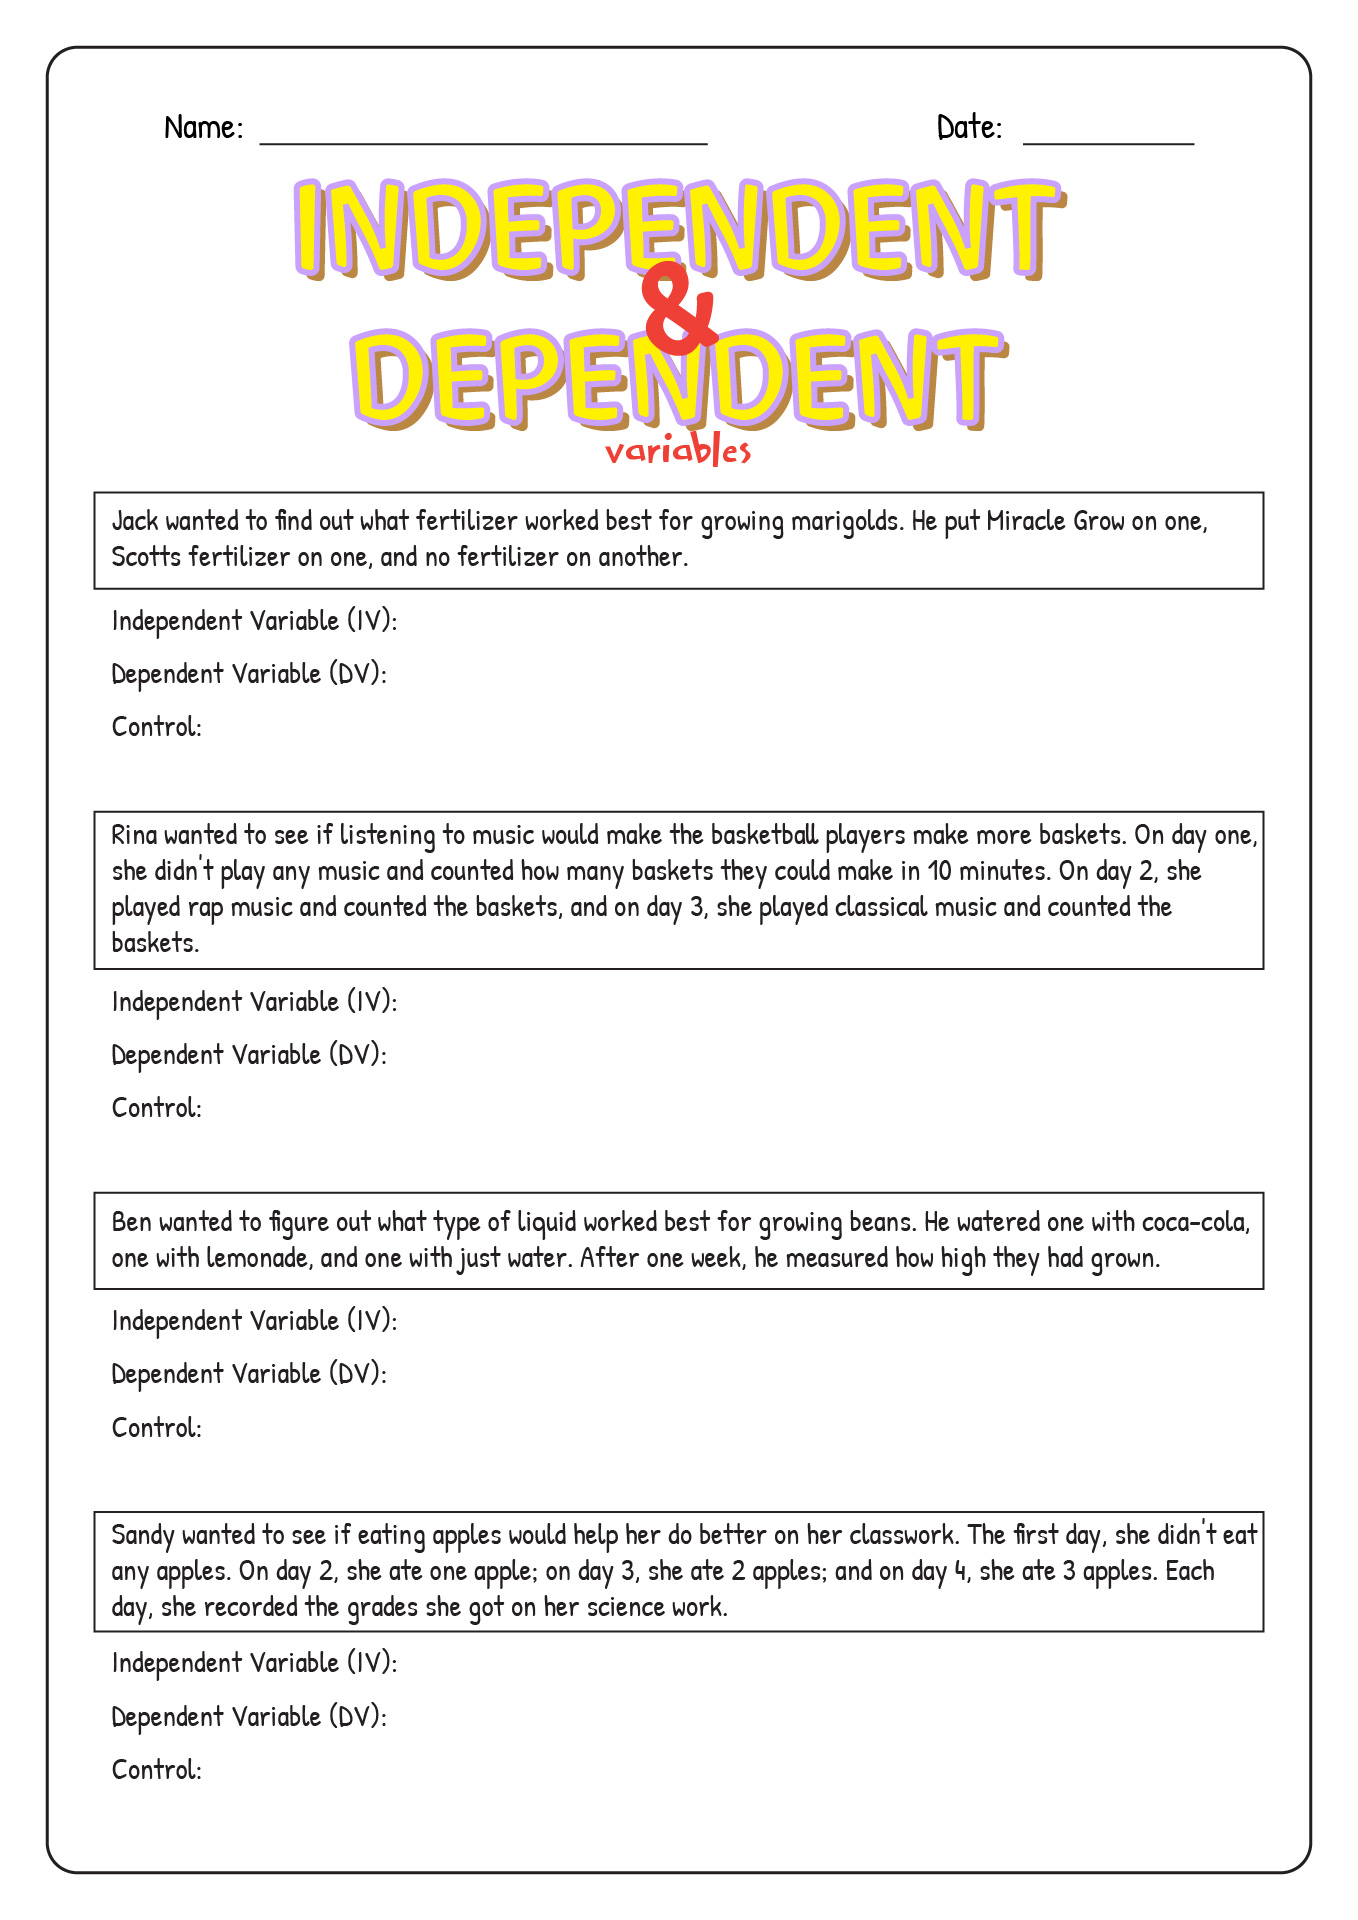 Independent and Dependent Variables Worksheet Science